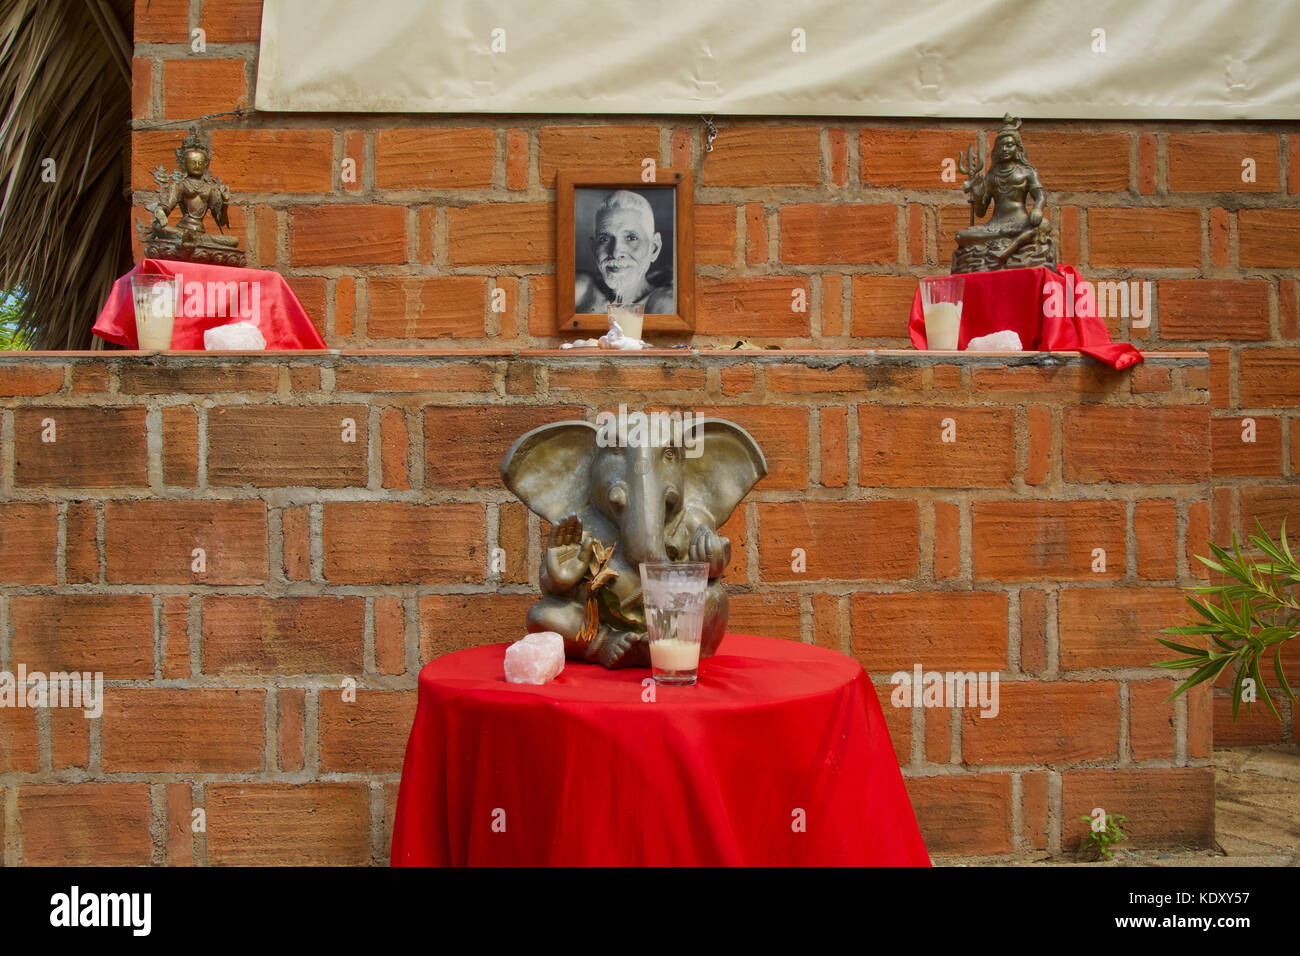 A portrait of Ramana Maharshi is displayed with offerings in Mexico Stock Photo